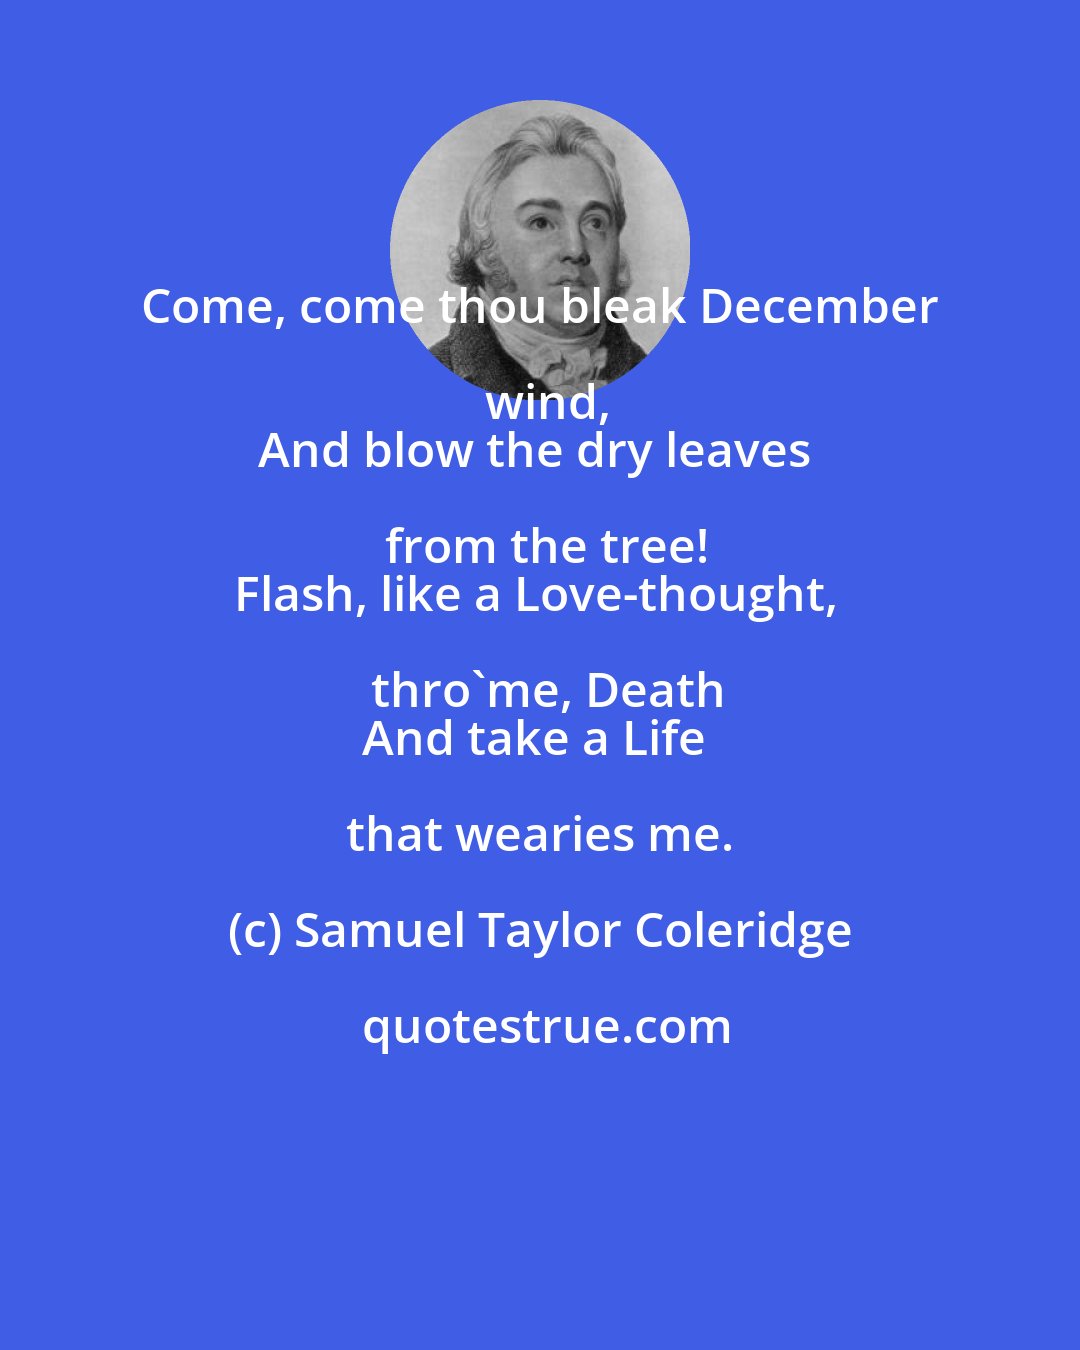 Samuel Taylor Coleridge: Come, come thou bleak December wind,
And blow the dry leaves from the tree!
Flash, like a Love-thought, thro'me, Death
And take a Life that wearies me.